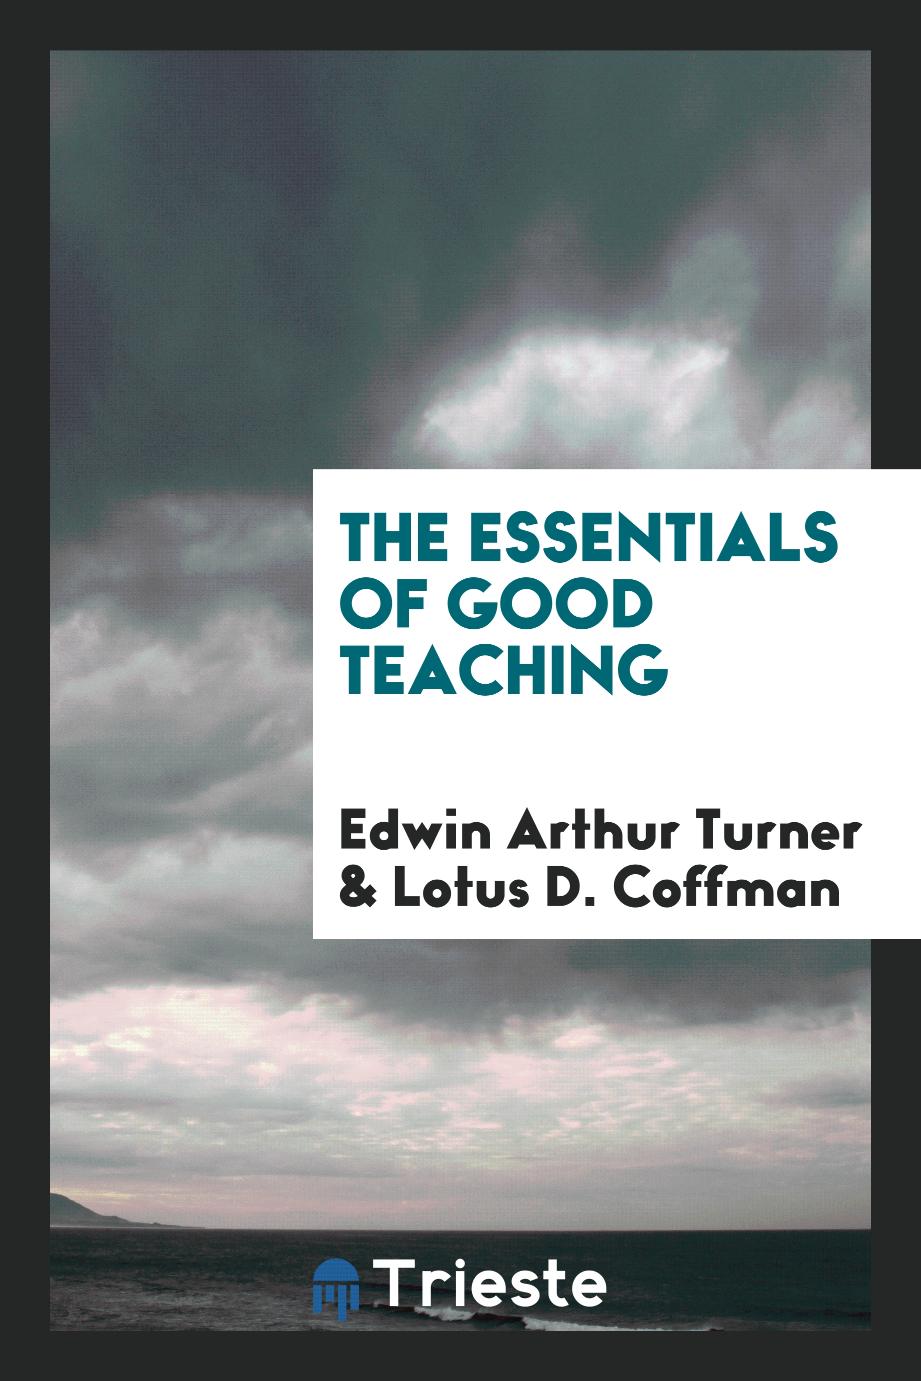 The essentials of good teaching